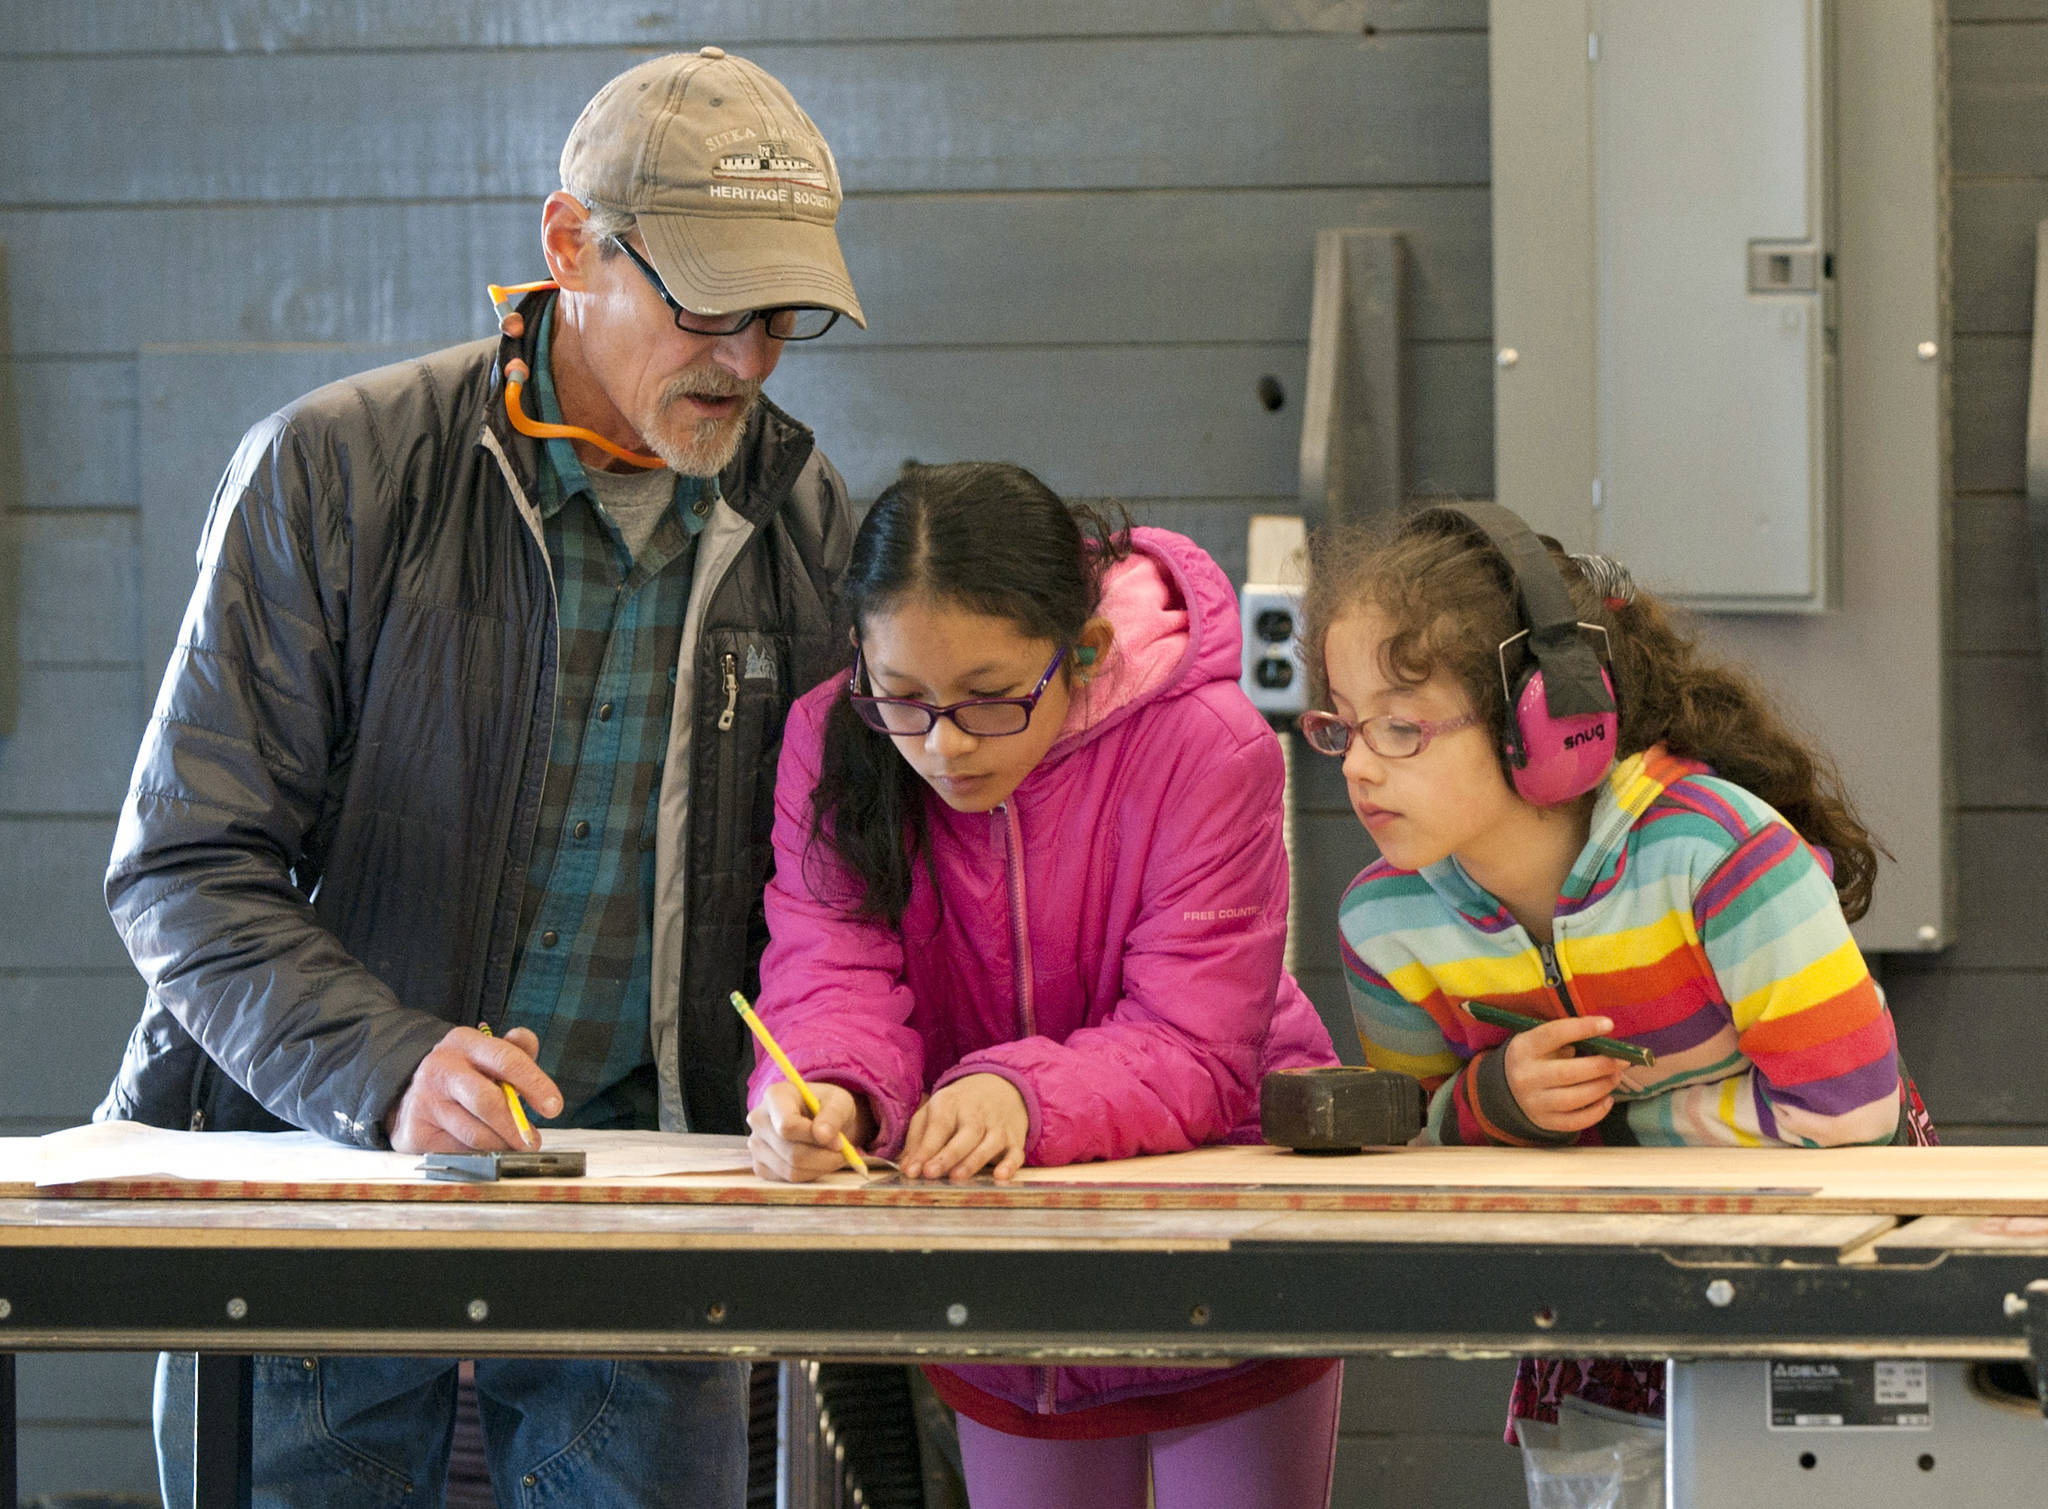 In this April 29, 2018 photo, Shipwright Joe D’Arenzio, left, shows Sitka 4-H students how to loft atterns to build skiffs at the Sitka Maritime Heritage Society’s WWII-era boathouse in Sitka, Alaska. The budding boatwrights are participating in a 4-H program to build two rowing and sailing dories in weekly Sunday afternoon installments and under the supervision of local boatwrights. James Poulson | Associated Press